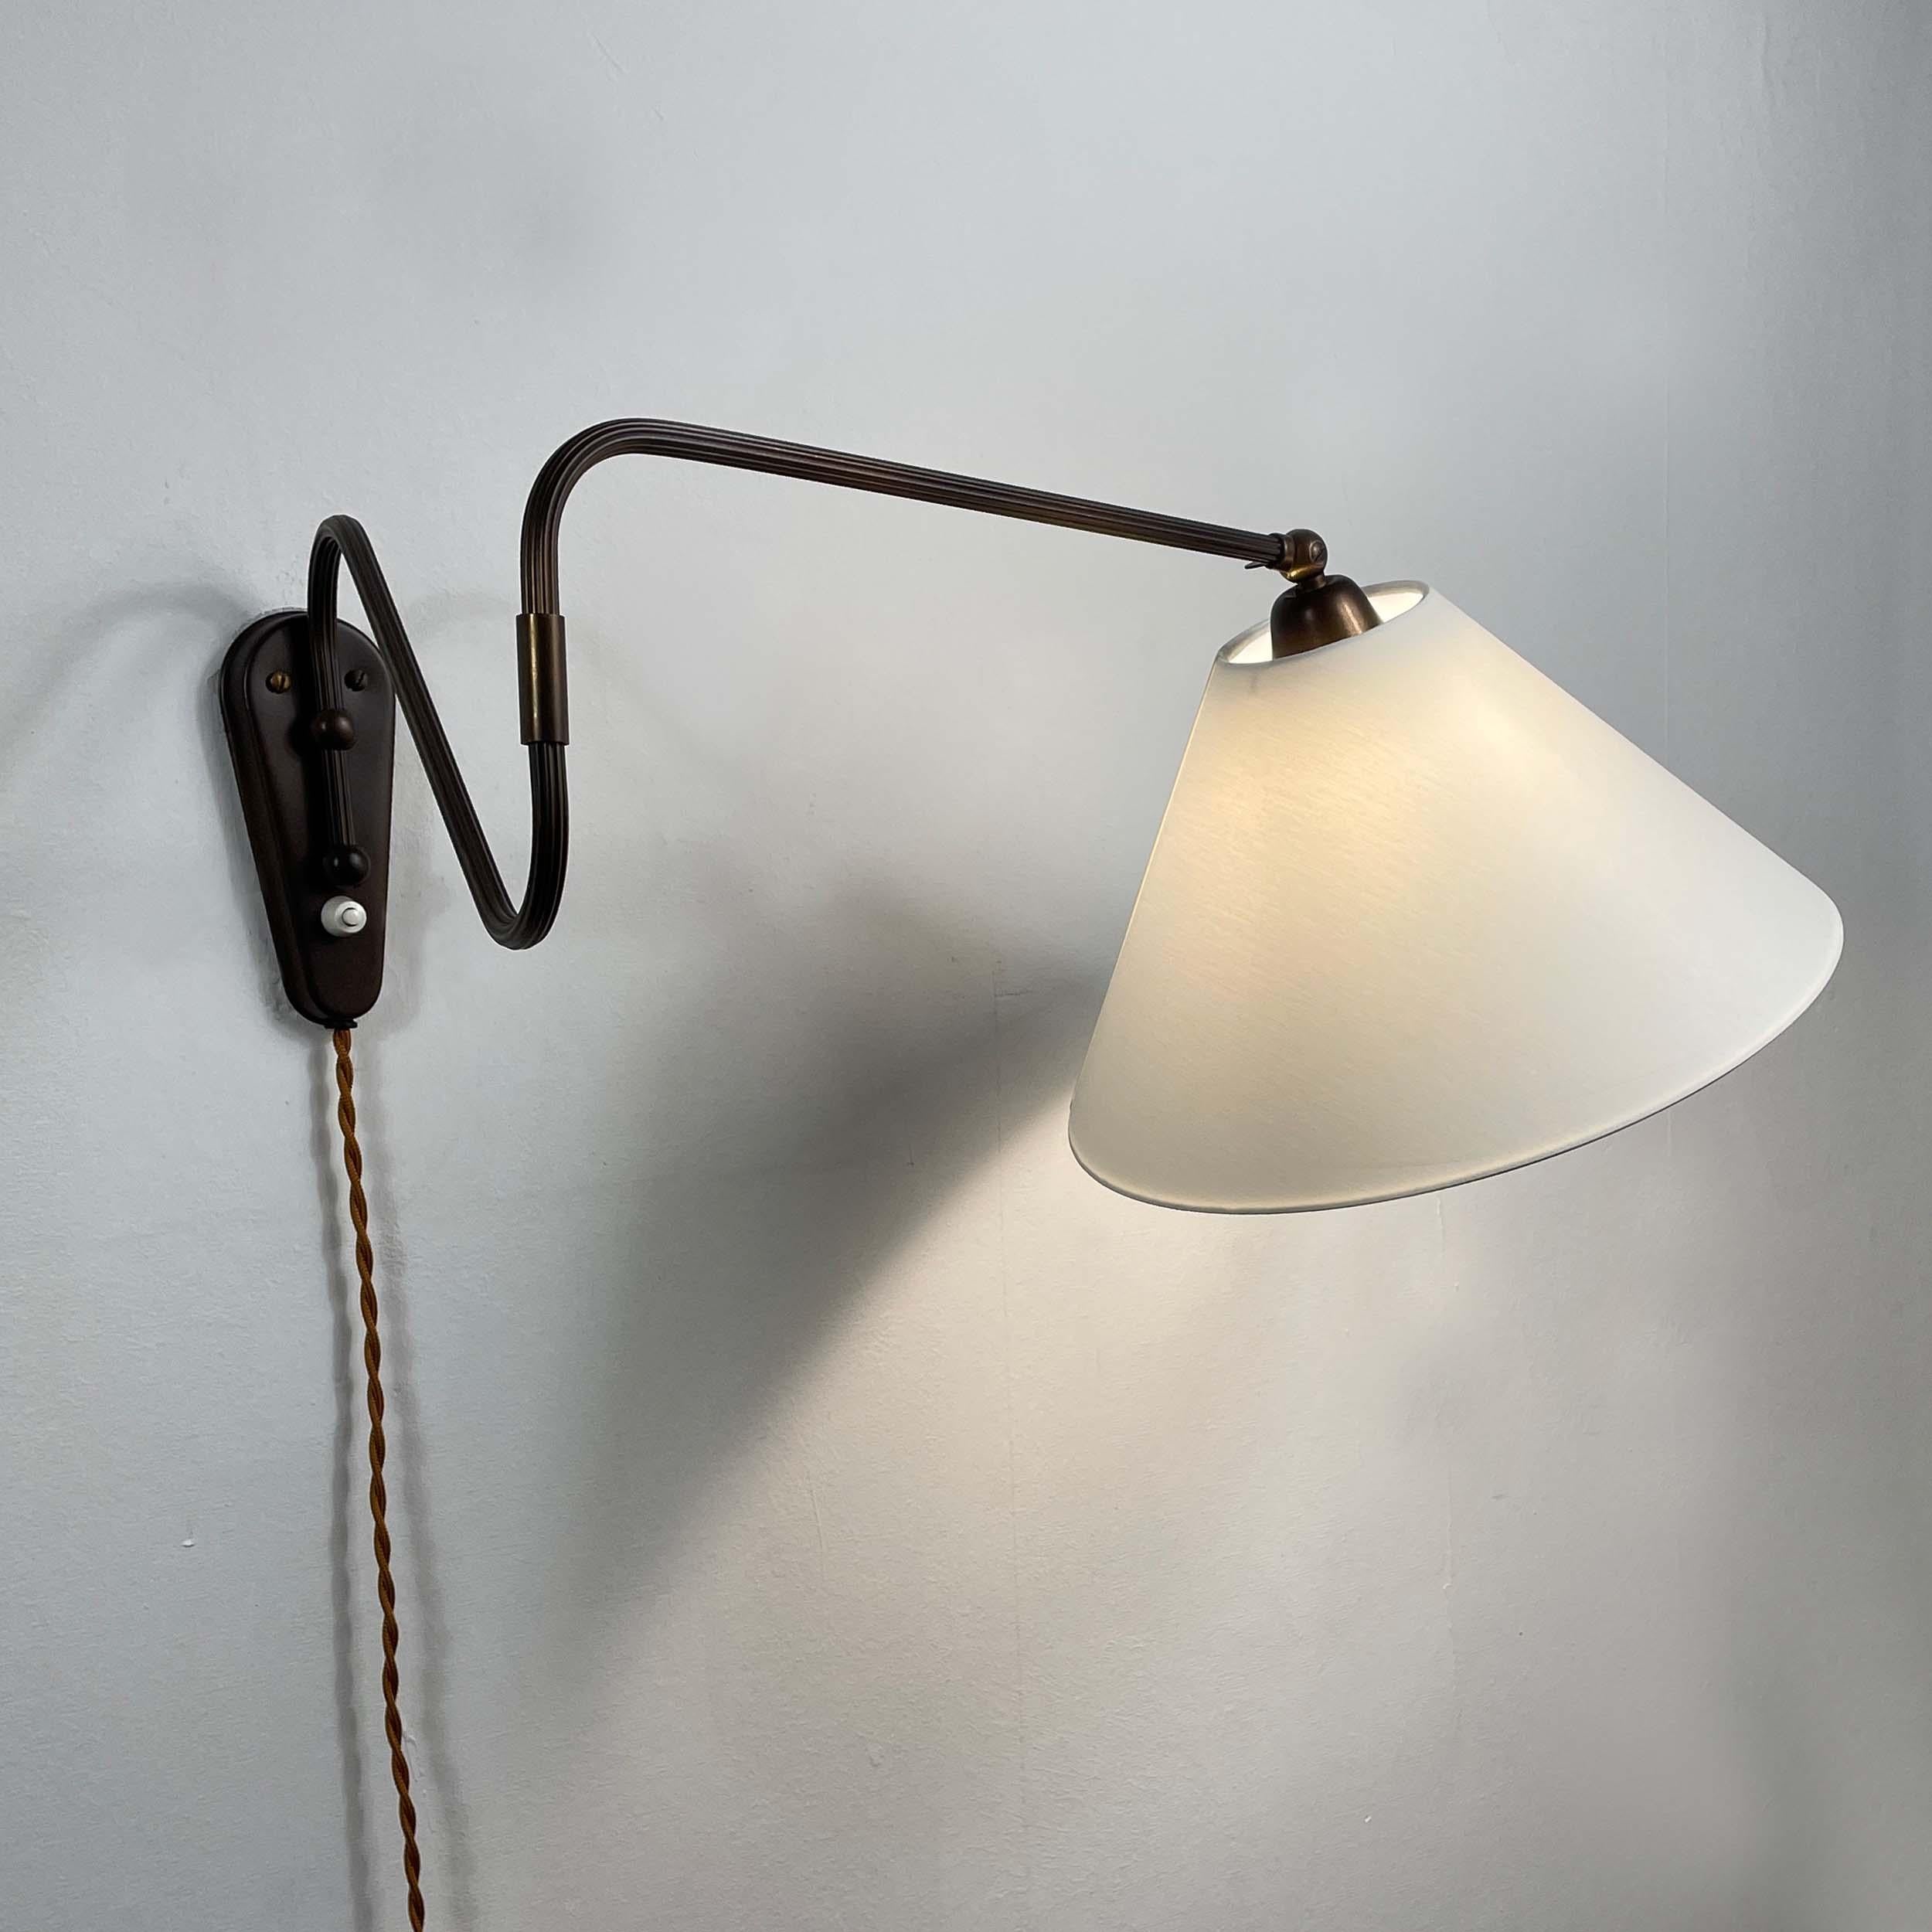 Mid-20th Century Bronzed Brass Articulating and Extendable Wall Light, Sweden 1950s For Sale